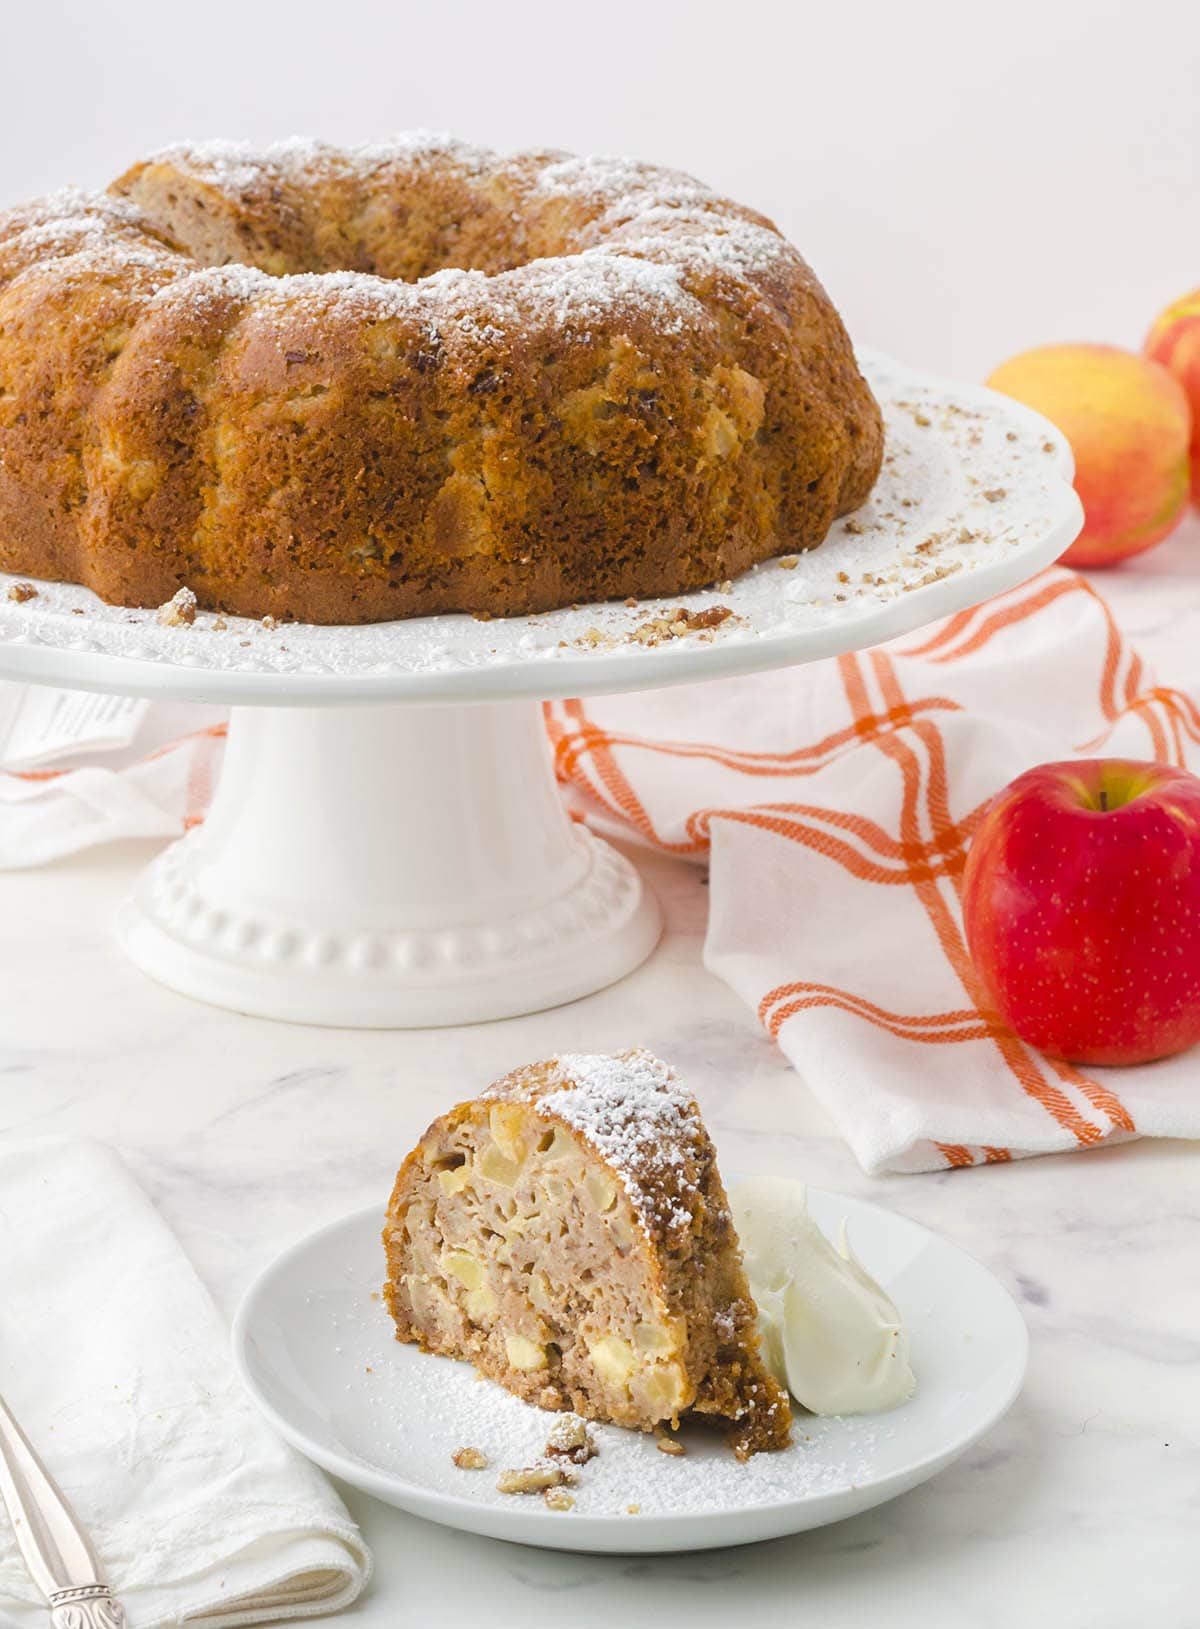 Apple Bundt Cake on cake stand with slice of cake on serving plate.